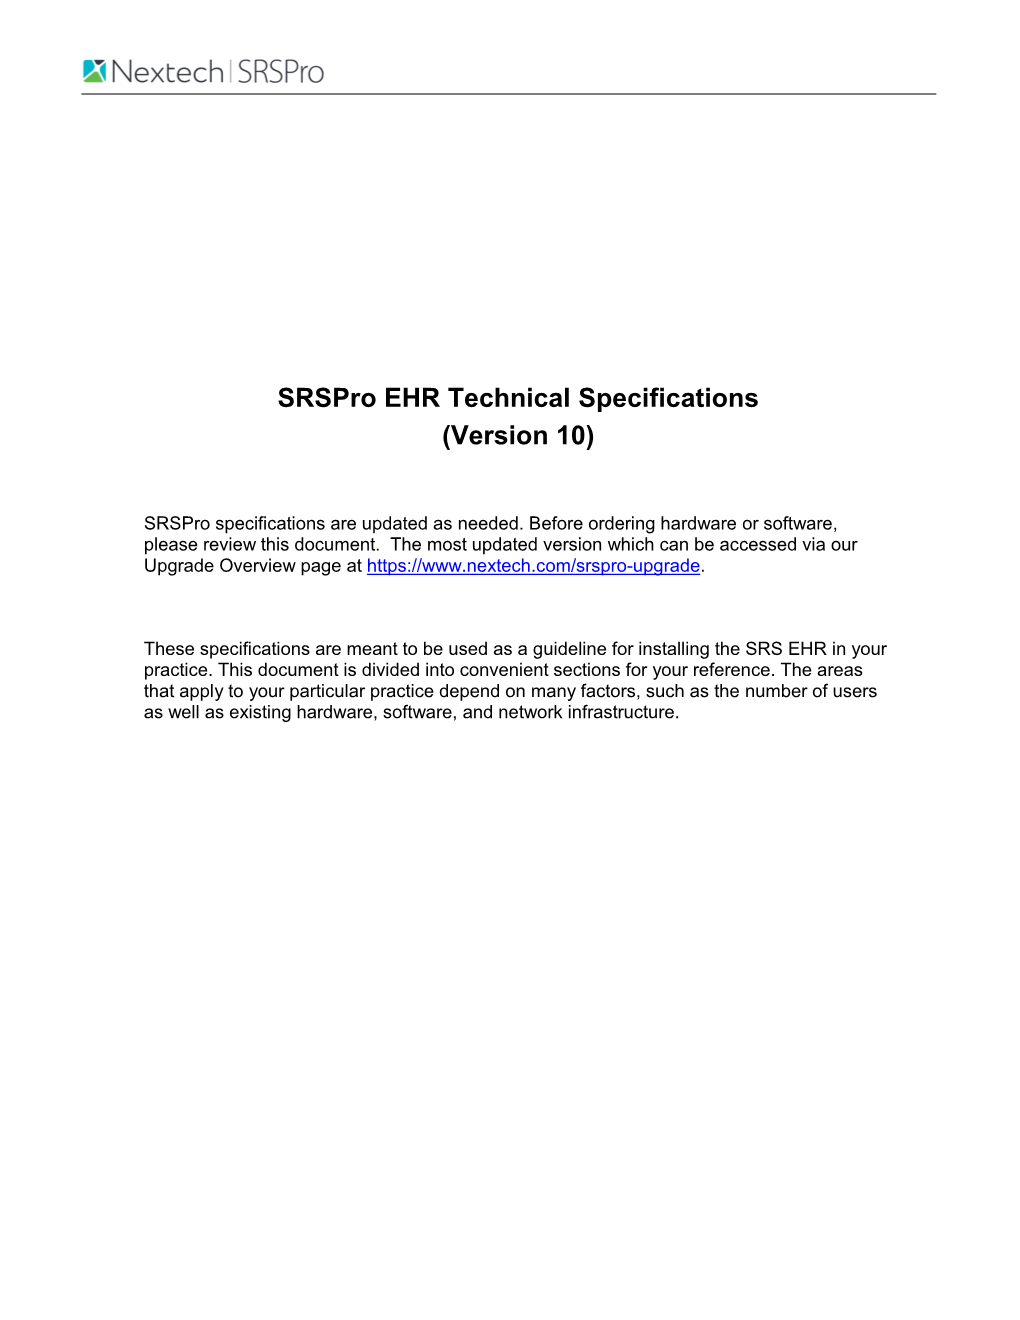 Srspro EHR Technical Specifications (Version 10)